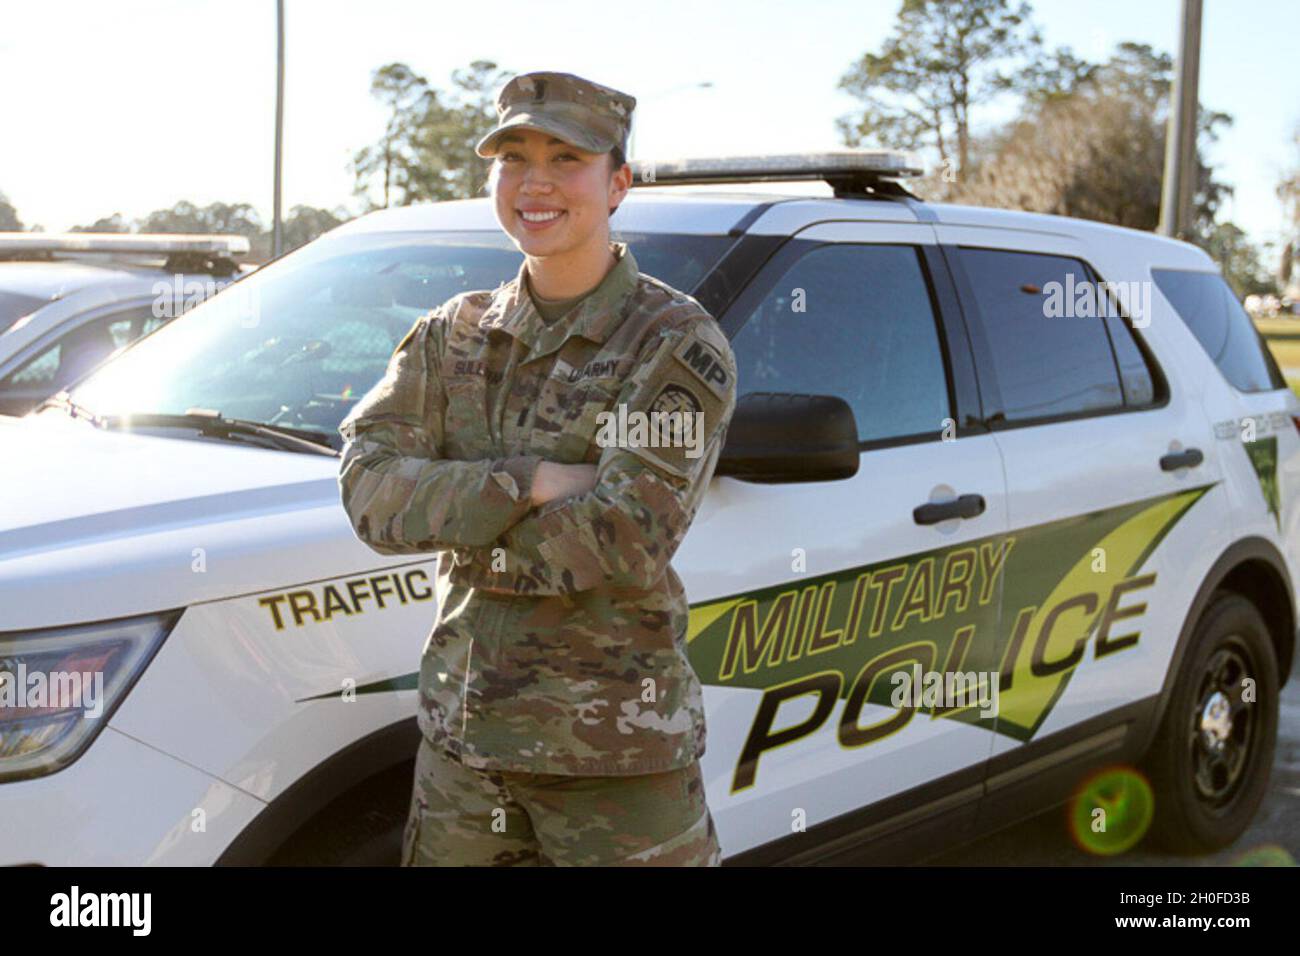 U.S. Army 1st Lt. Jennifer Sullivan, a military police officer assigned to the 293rd Military Police Company, 385th Military Police Battalion, at Fort Stewart, Georgia, was raised in Seoul, Korea. She graduated from Patch American High School in Stuttgart, Germany, in 2013. She has a bachelor's degree in international history. “I joined the Army because with my father serving for 30 years, I got to see up close the benefits and opportunities the military provided. I think females provide a unique and different perspective to problem-solving. There are still obstacles we have to overcome as a s Stock Photo